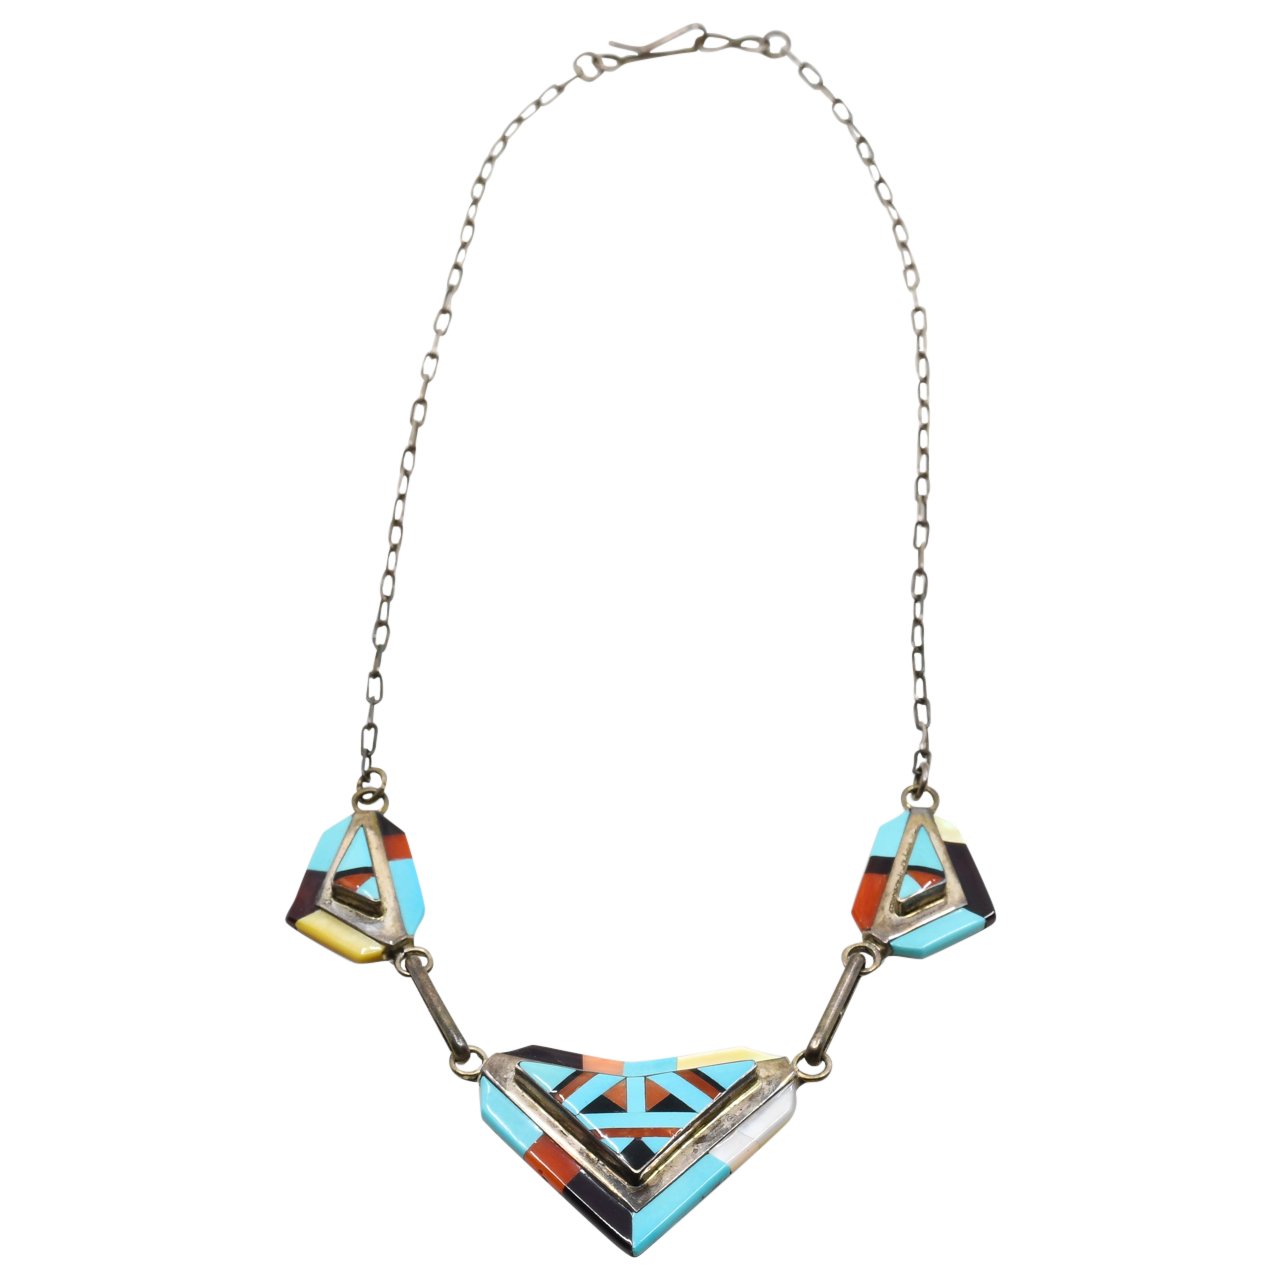 Vintage Zuni Inlay Necklace by Ophelia Panteah - Turquoise & Tufa